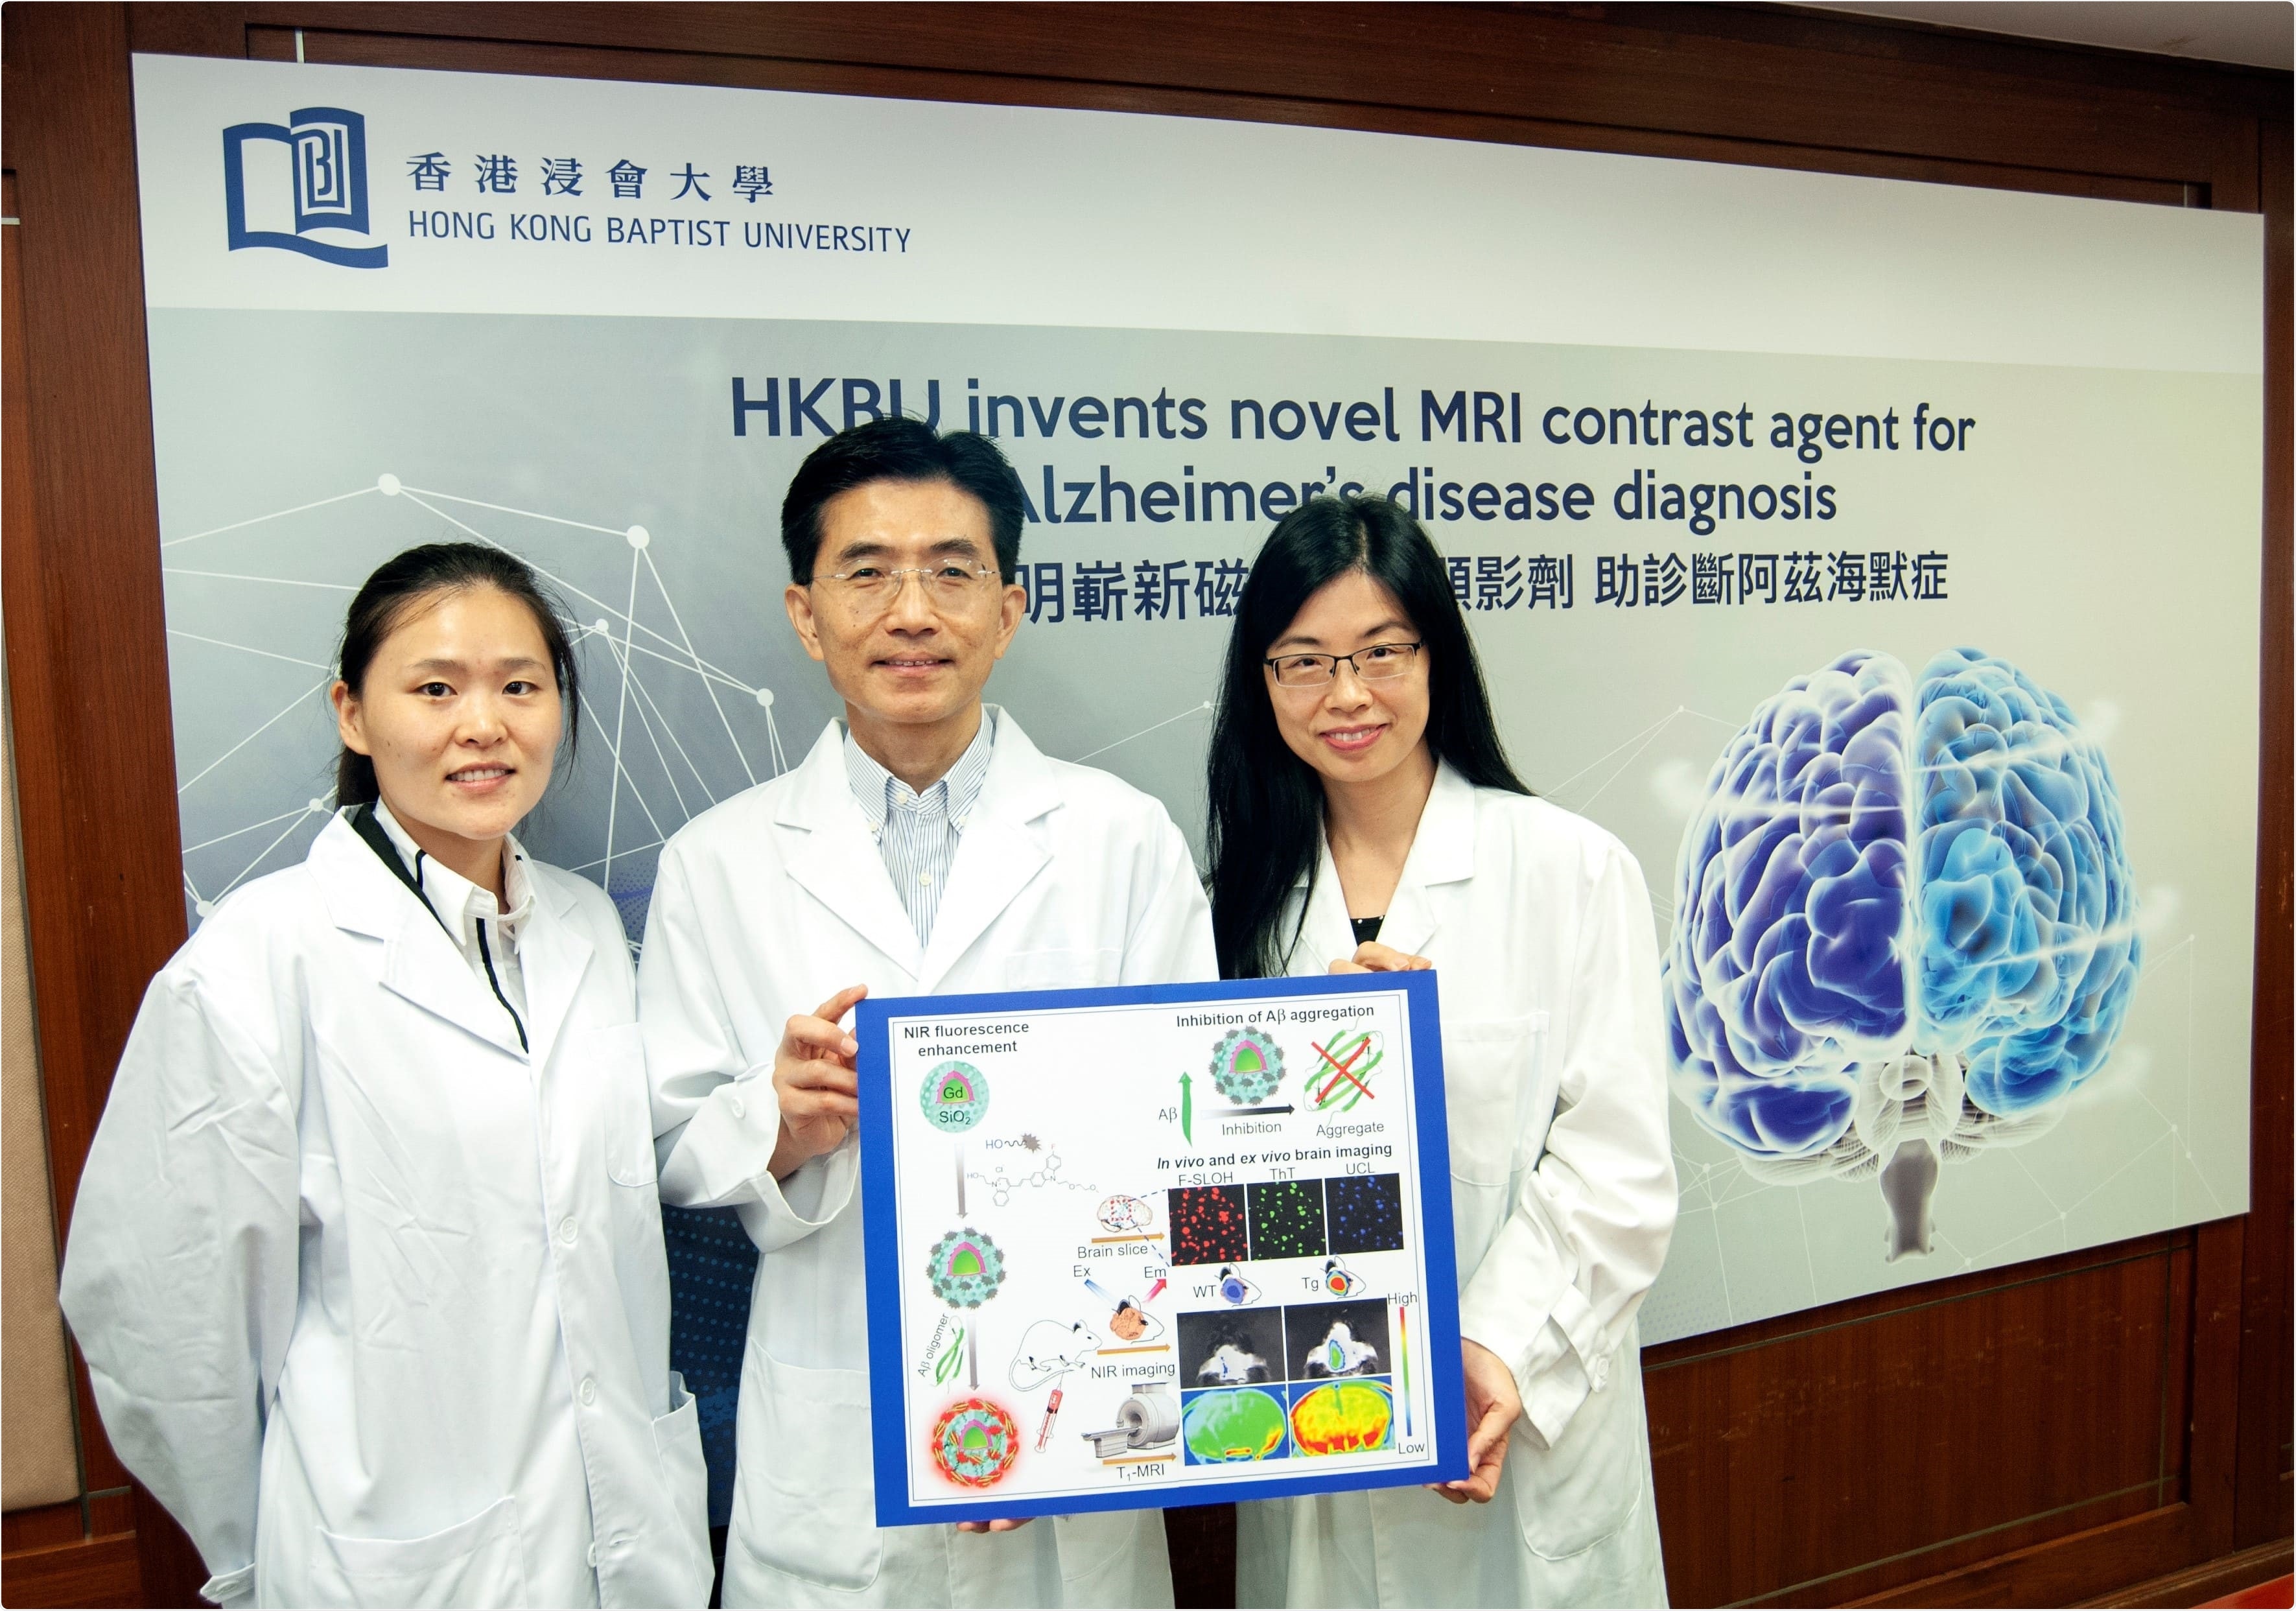 Novel MRI contrast agent offers hope for early detection of Alzheimer’s disease